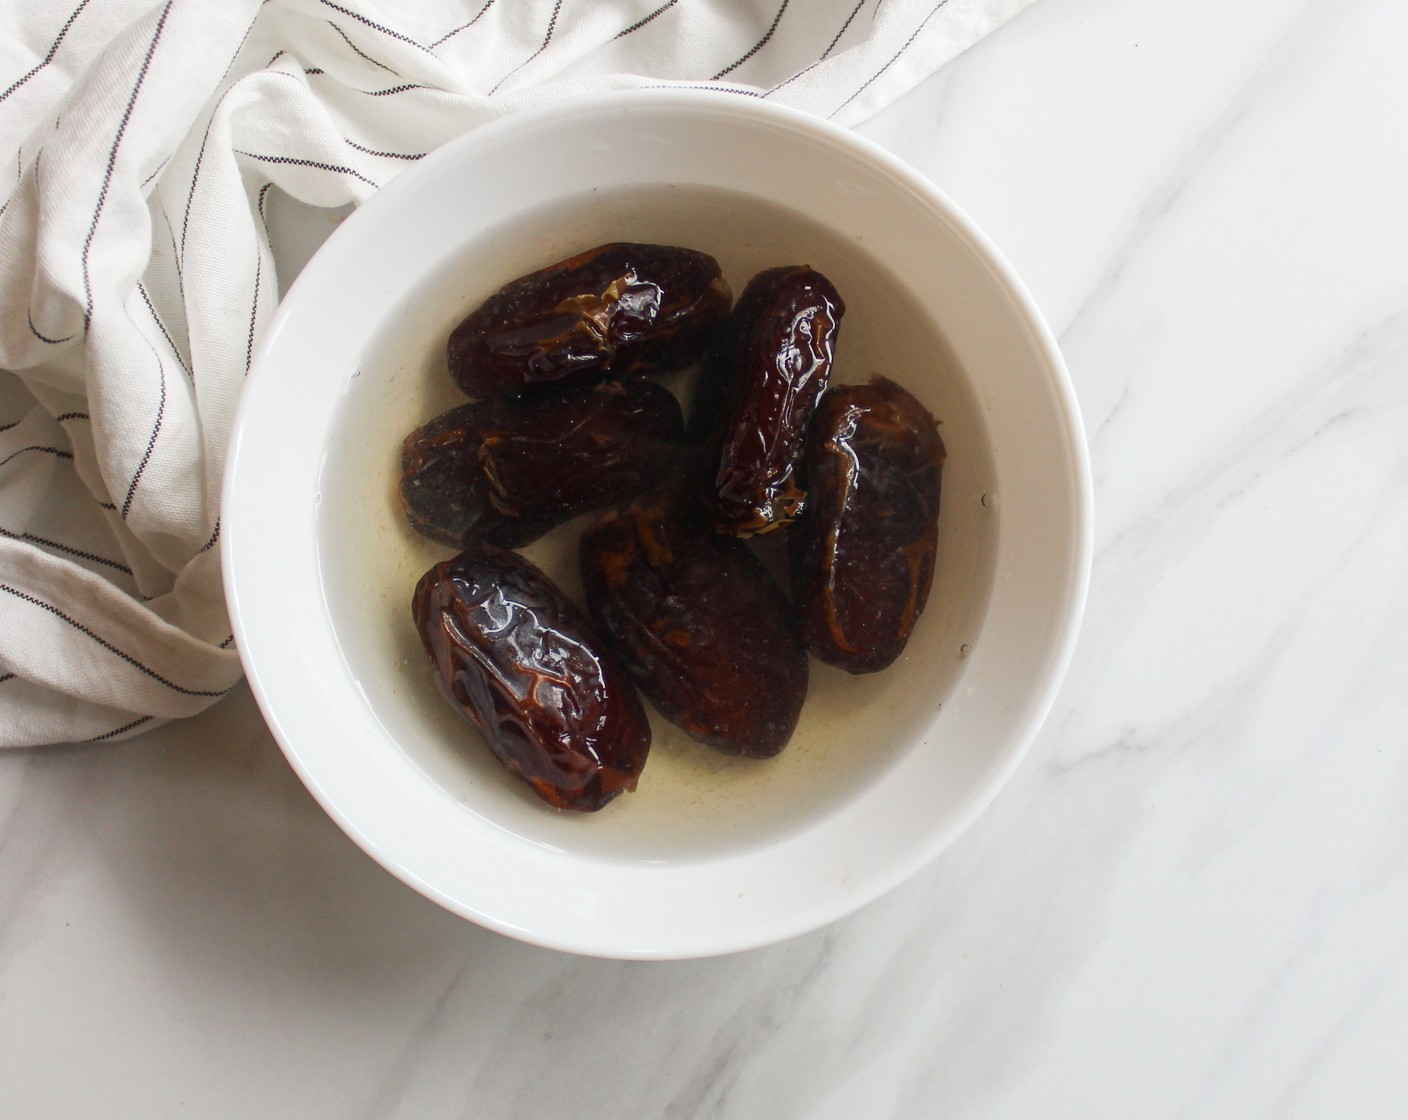 step 1 Start by soaking your Dates (1 cup) in hot water for at least 20 minutes to soften them. Pit them and set aside.